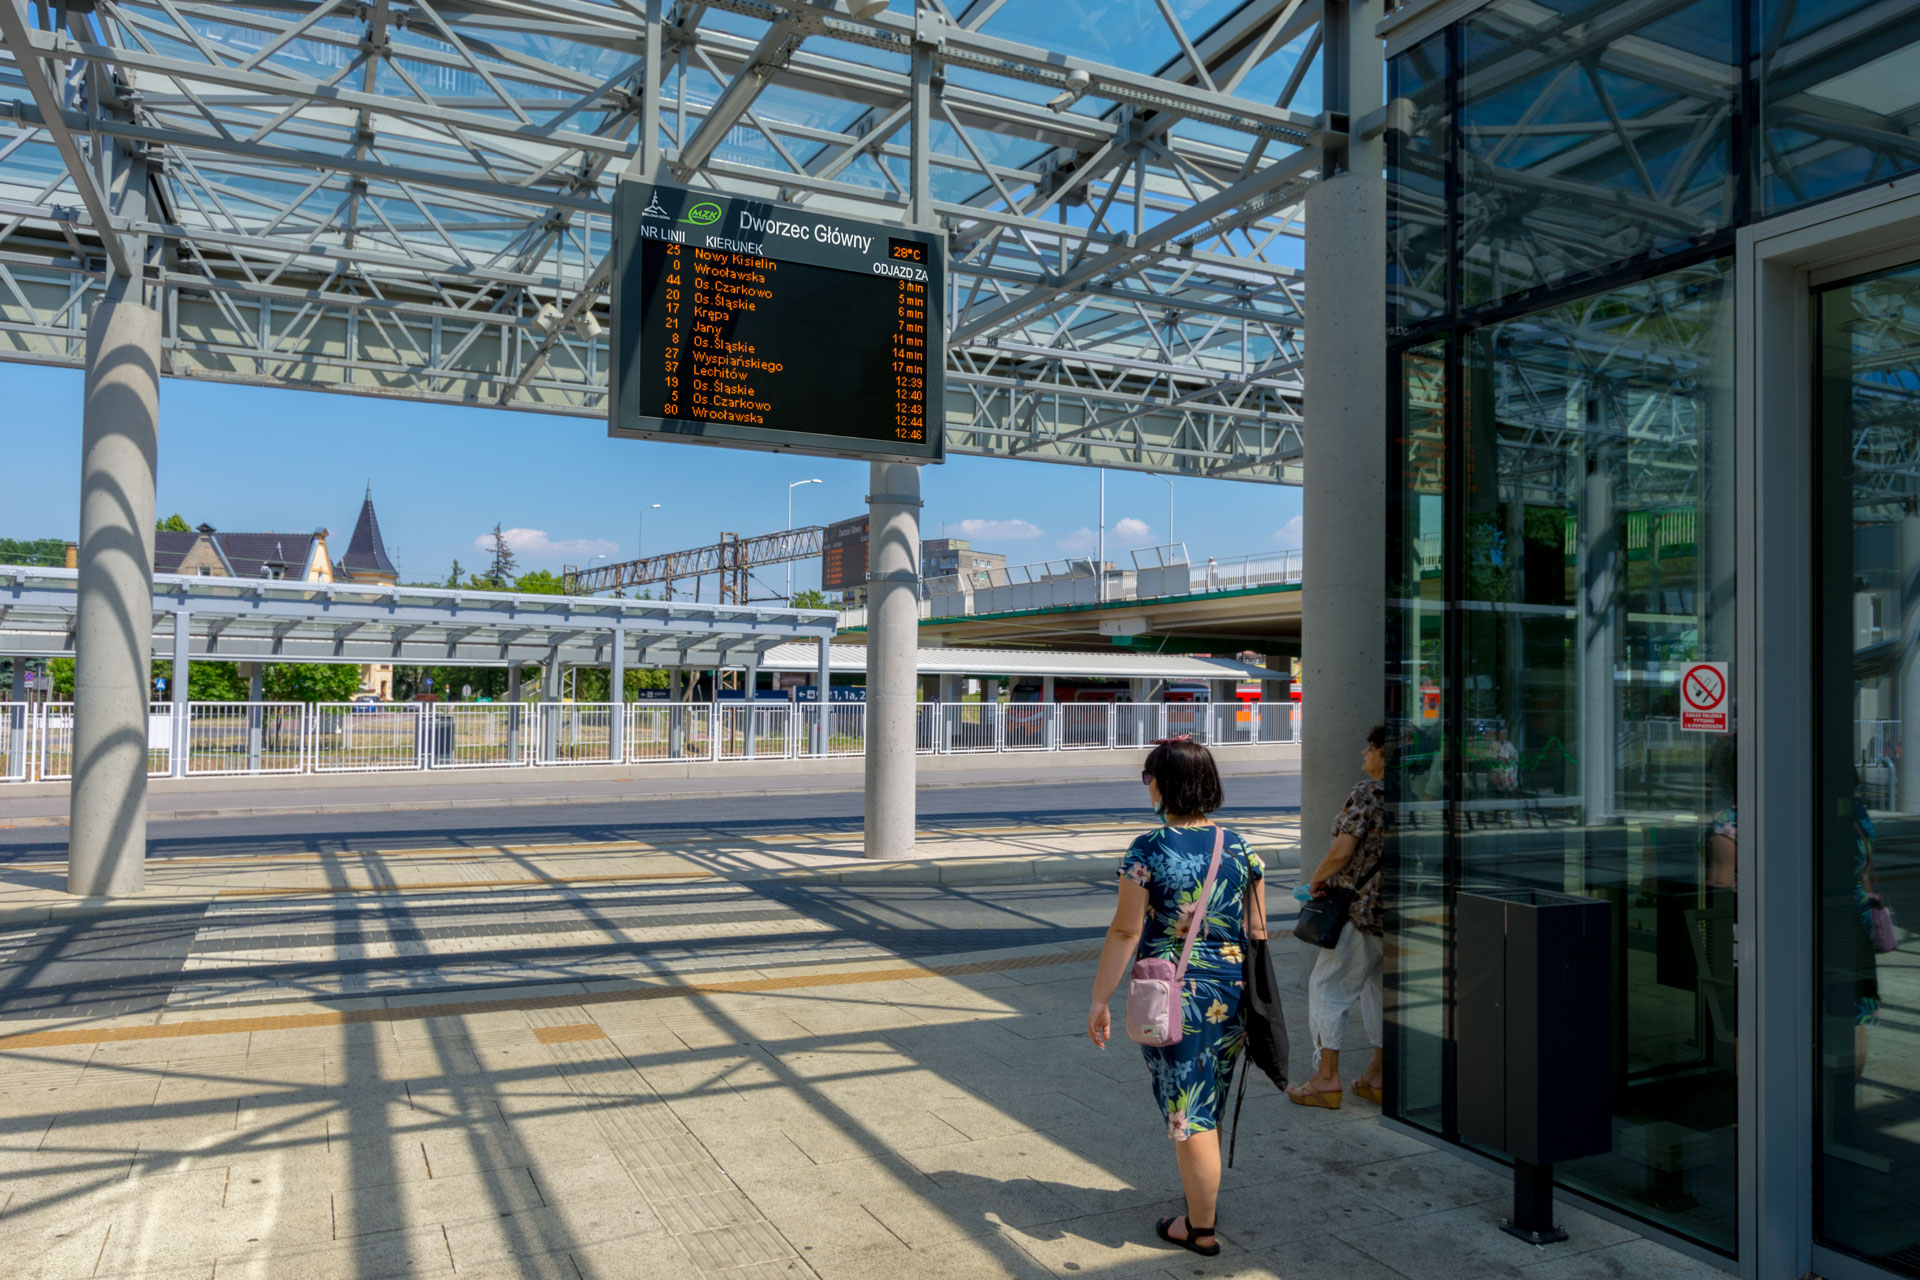 Main 2-sided amber LED passenger information board made by DYSTEN